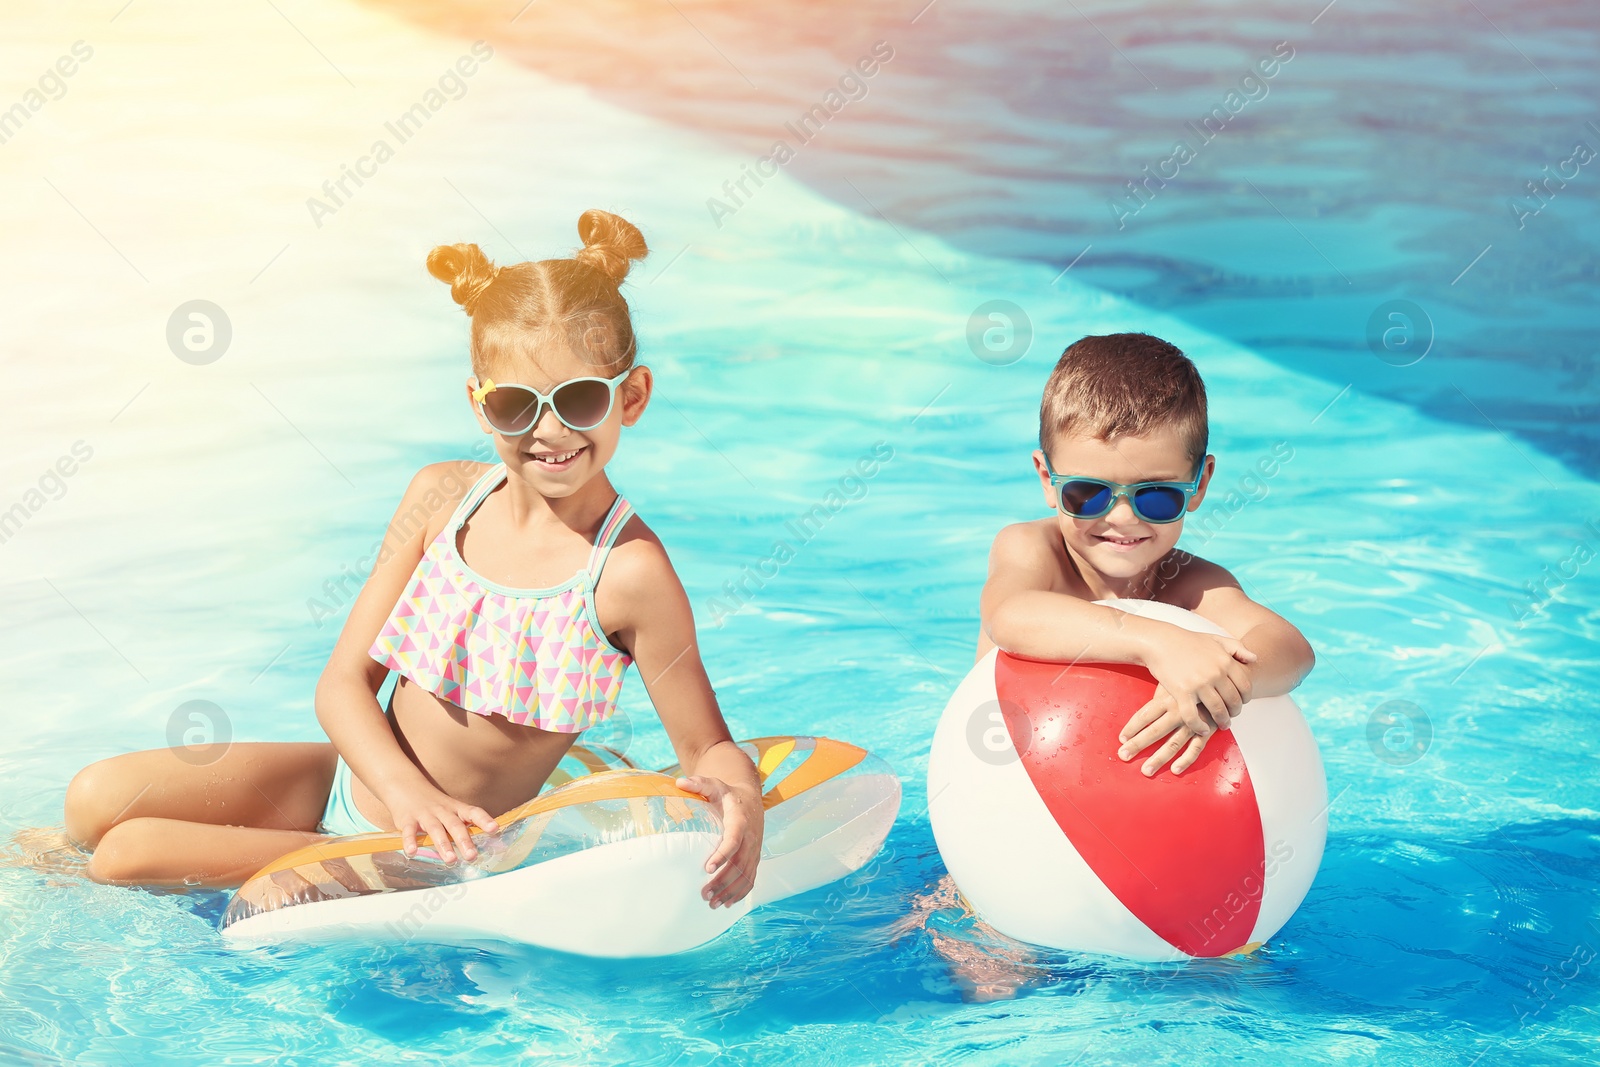 Image of Cute little children with inflatable toys in swimming pool